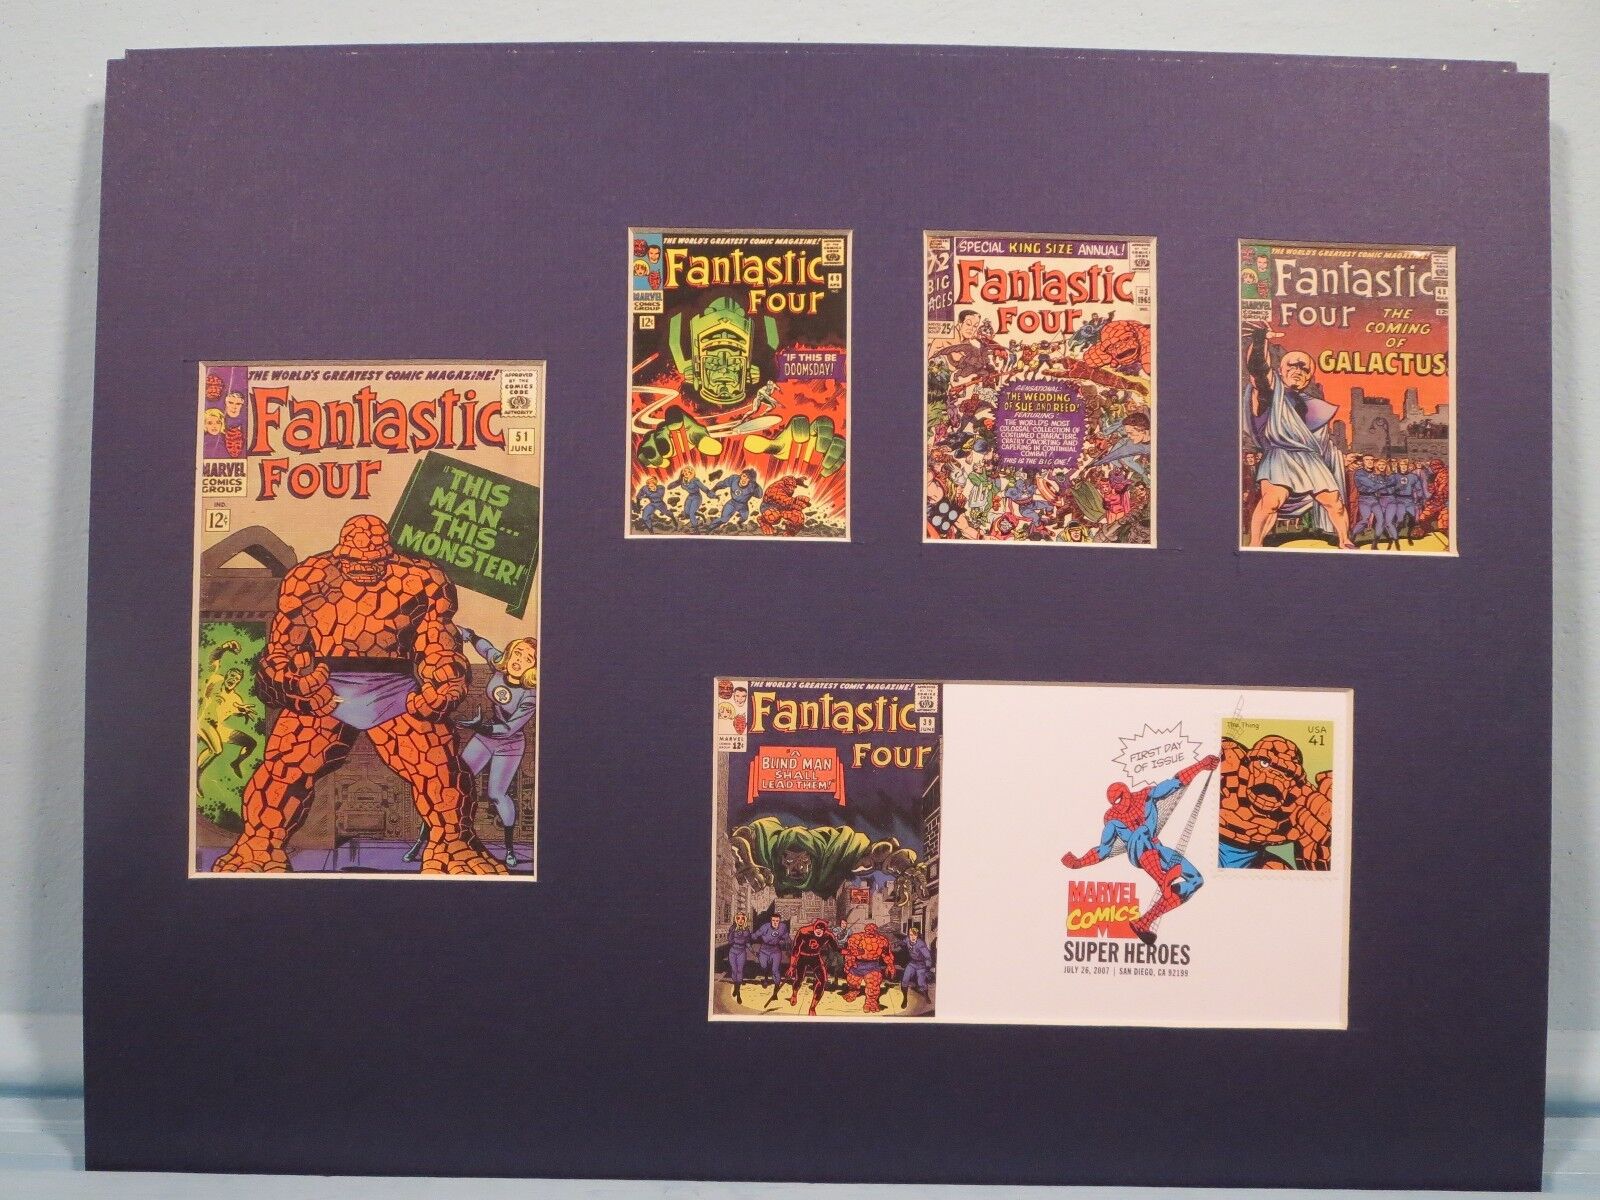 Marvel Comics Heroes - The Fantastic Four & First Day Cover of their own stamp